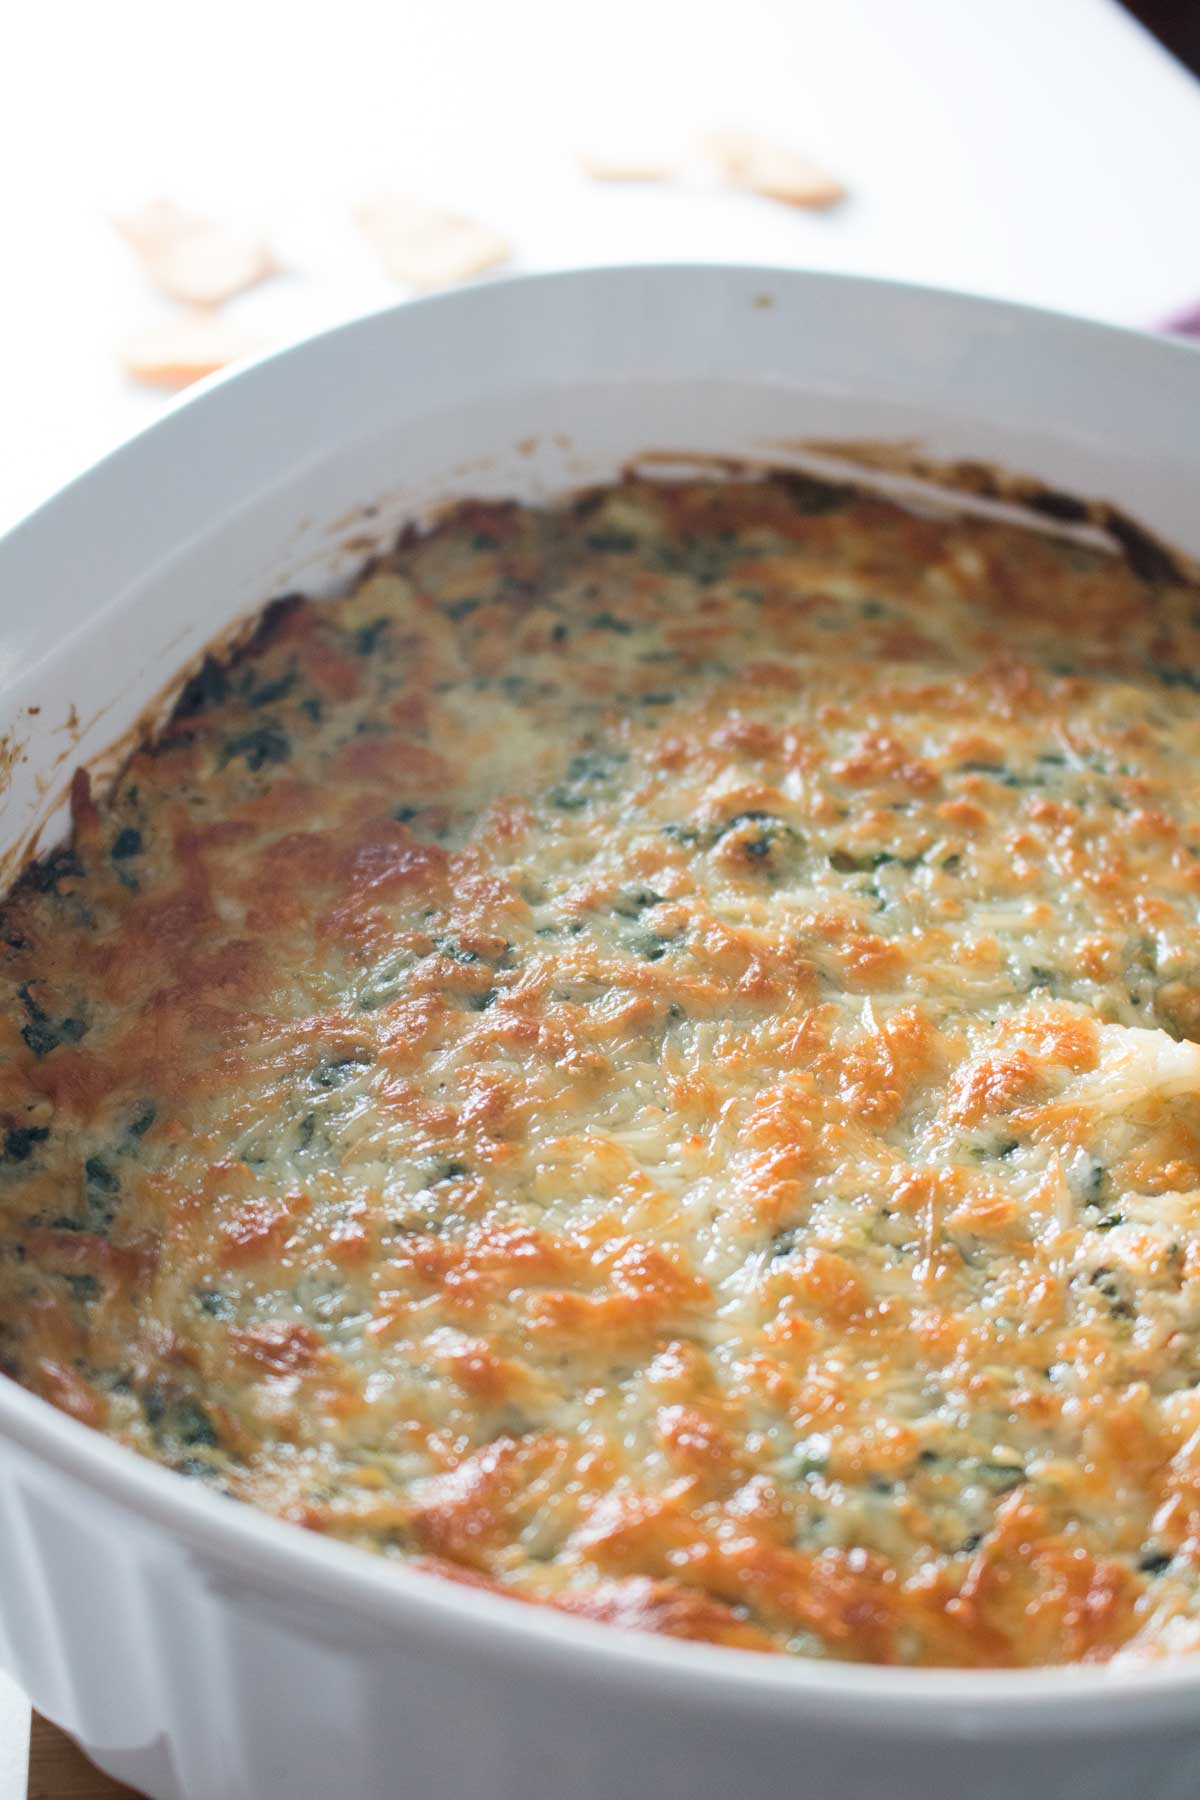 Closeup of bubbly brown cheese on top of baked spinach, artichoke, and crab dip in white casserole dish